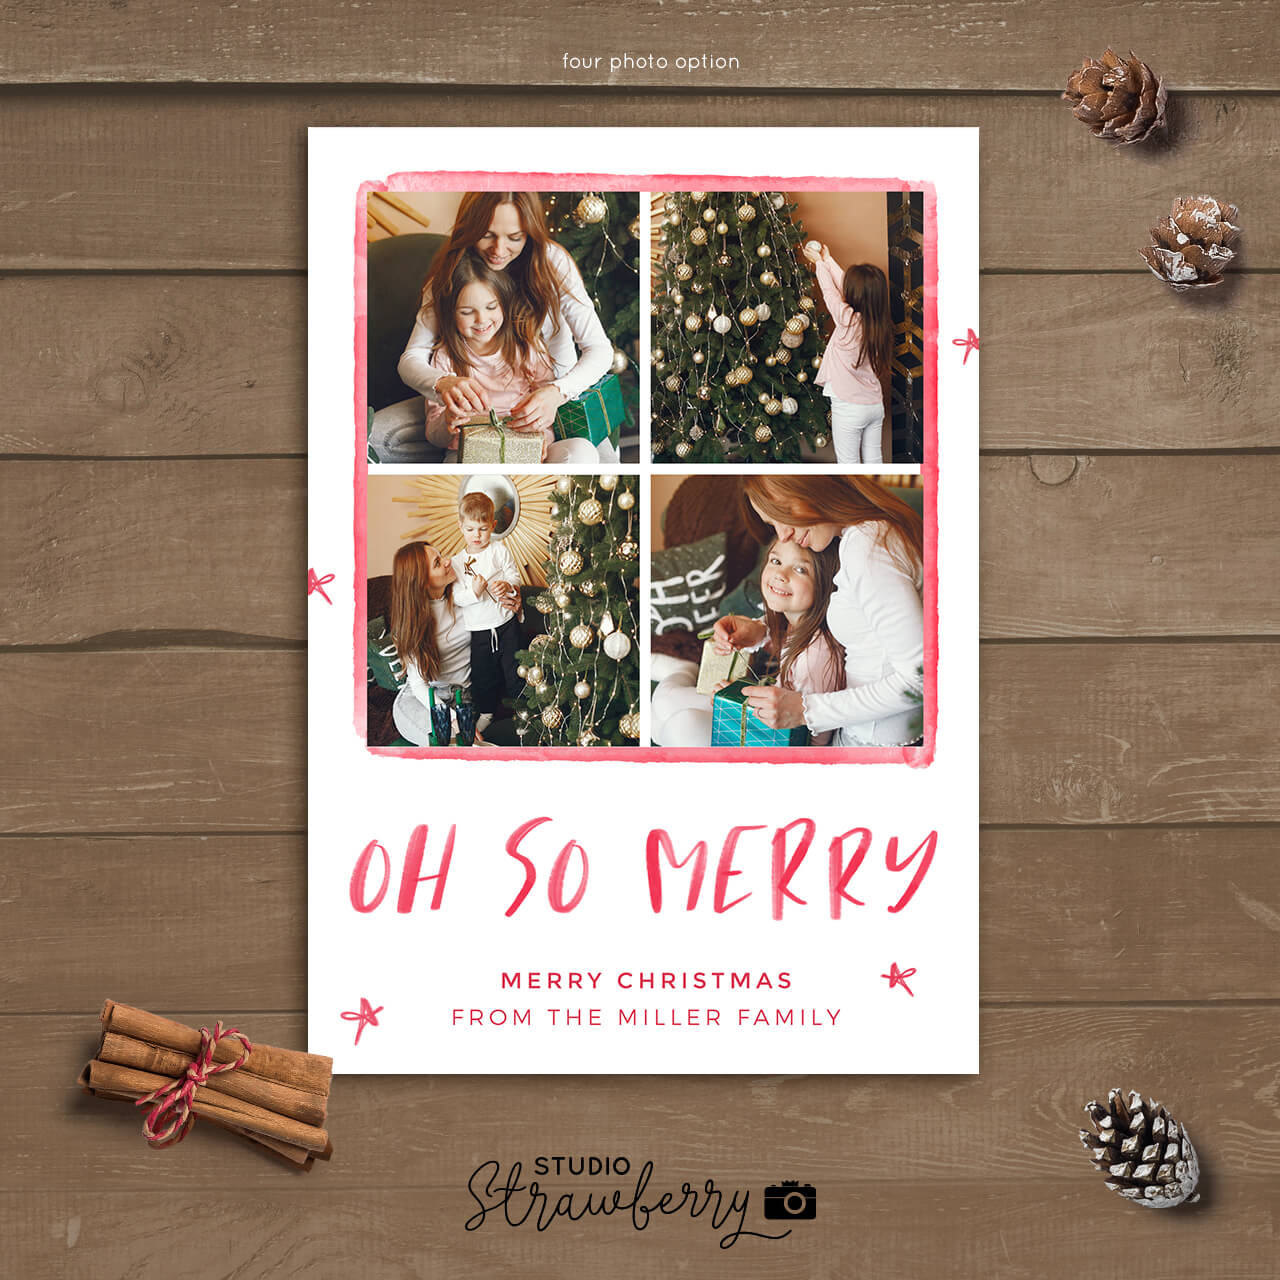 Oh So Merry Christmas Photo Card Template